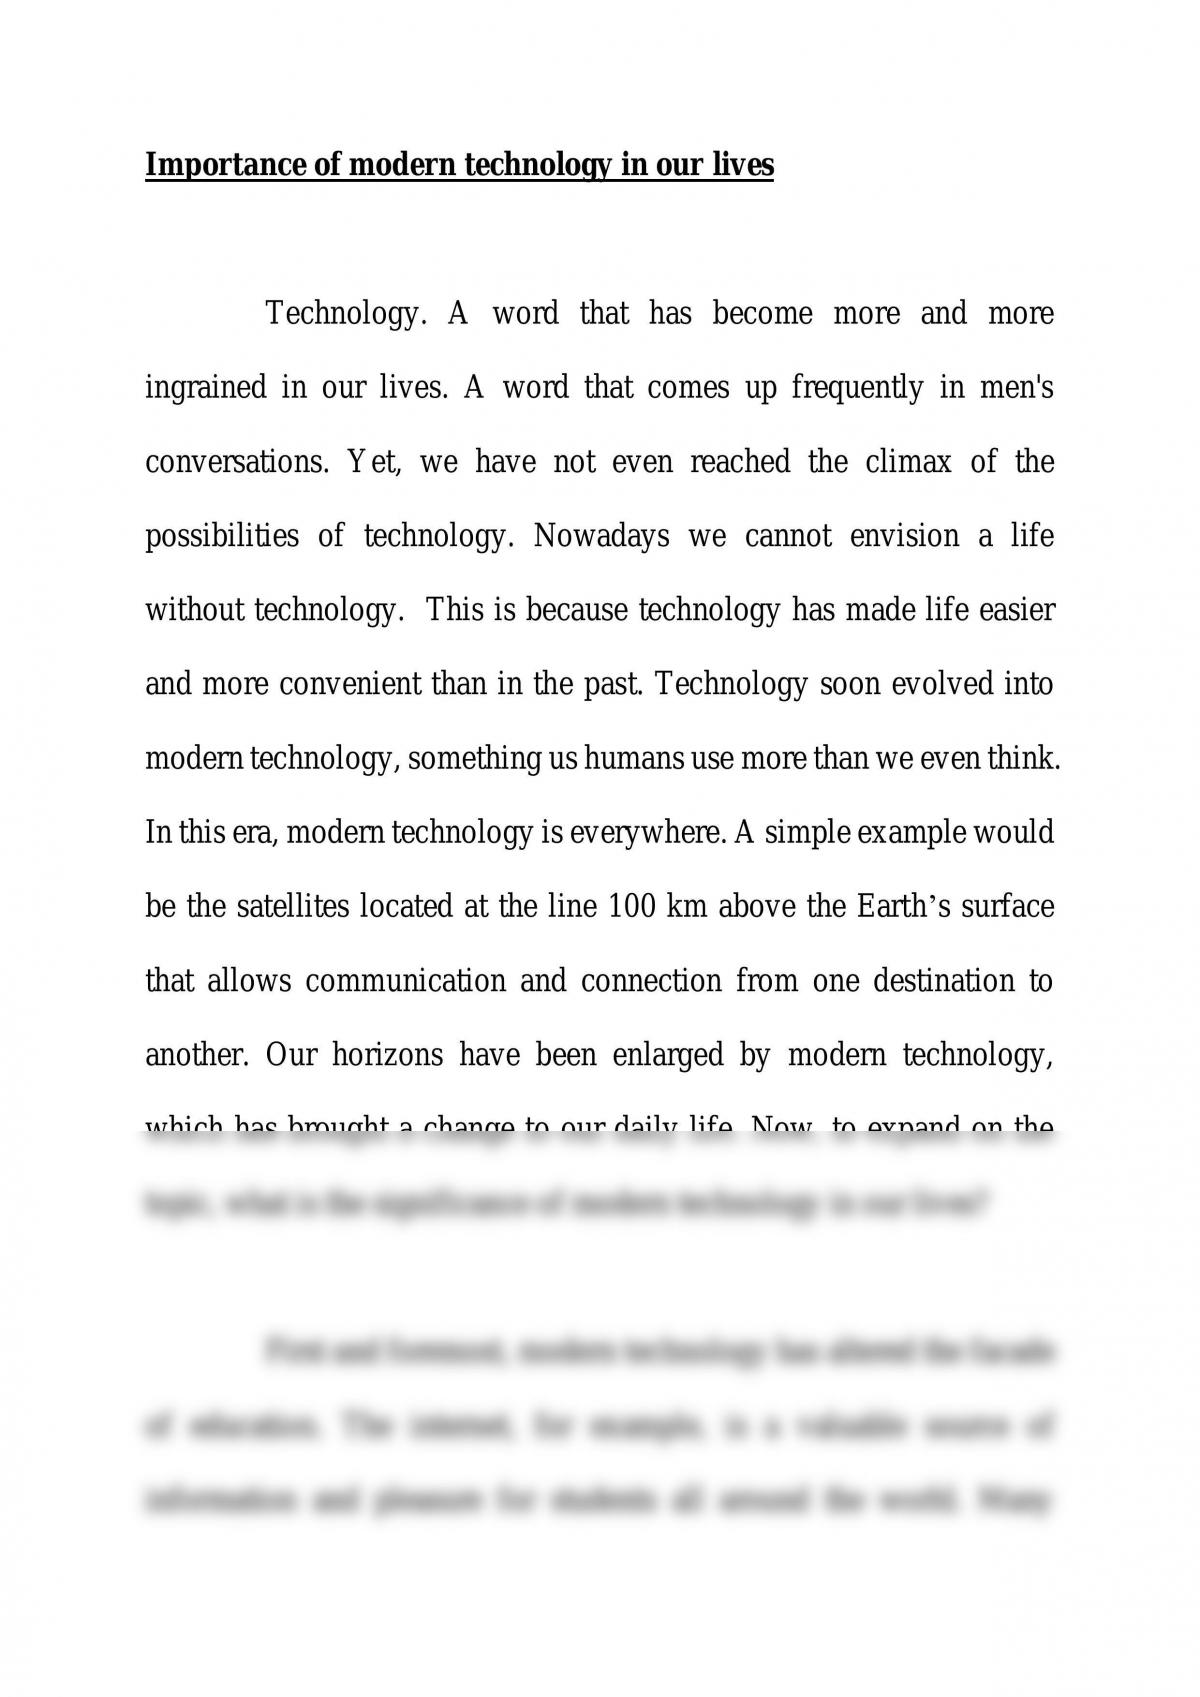 essay about modern technology in everyday life